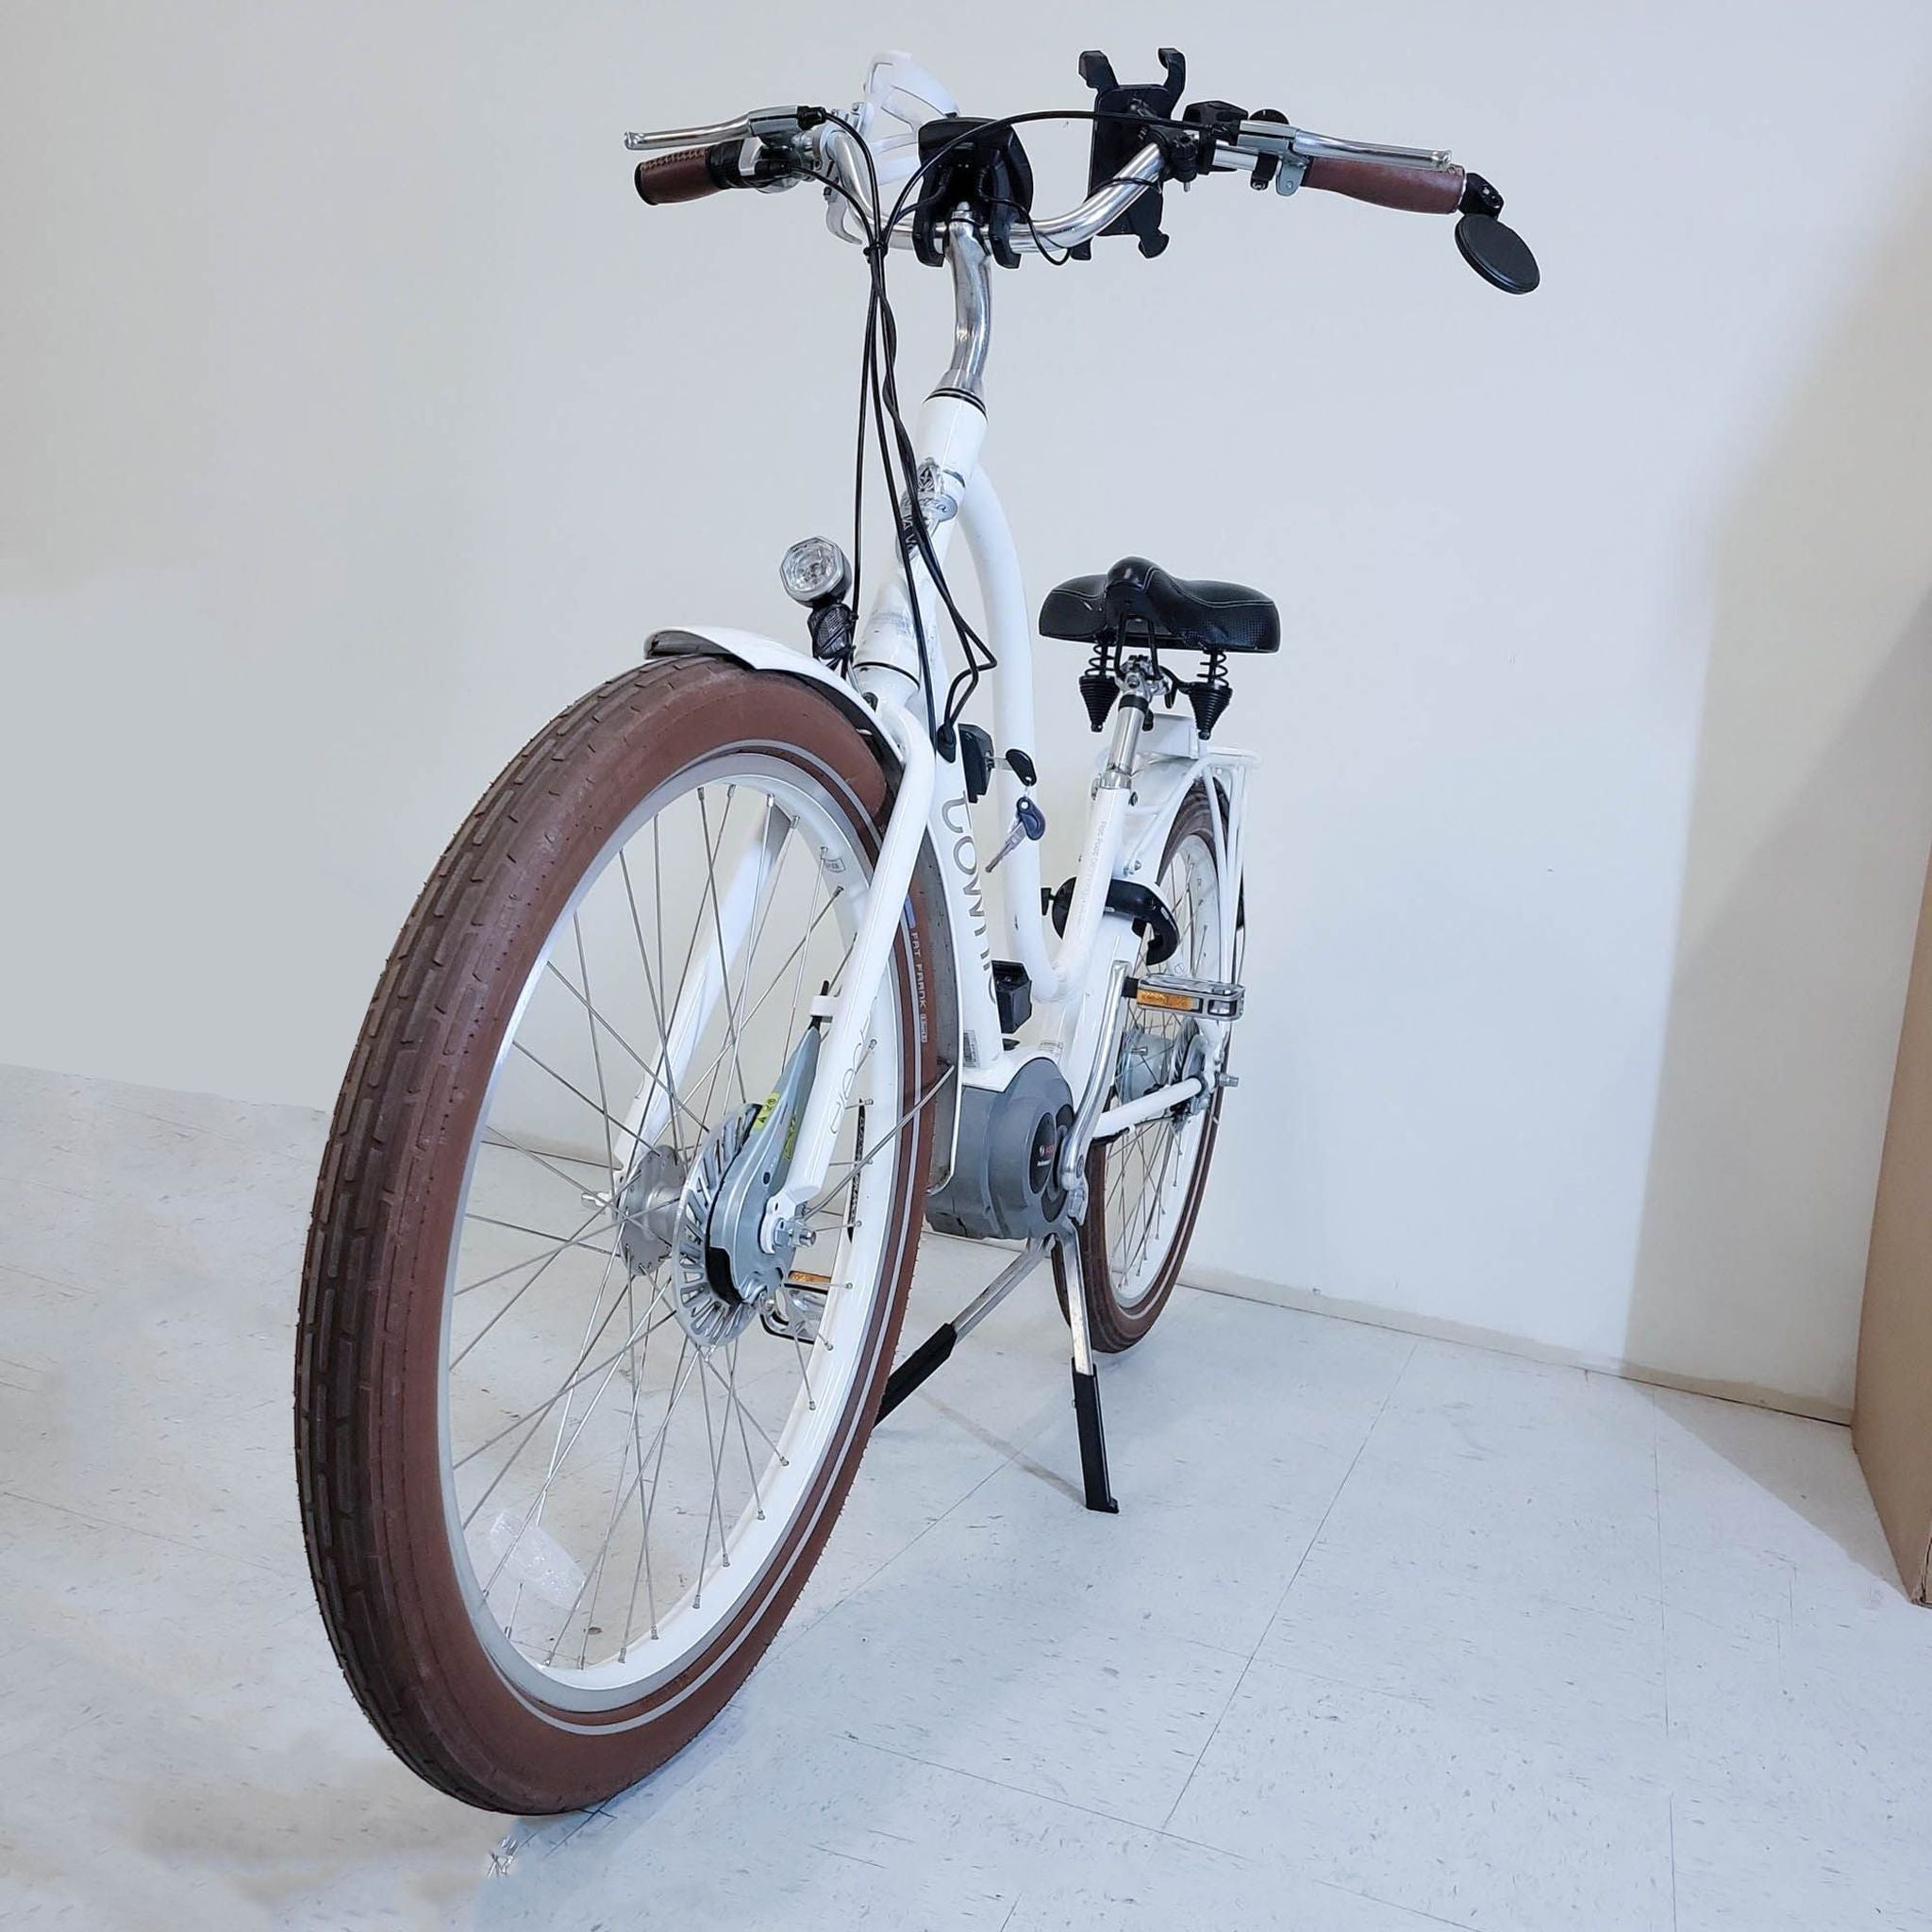 White Electra Townie Go motorized e-bike with ergonomic design and comfortable seat, positioned indoors.